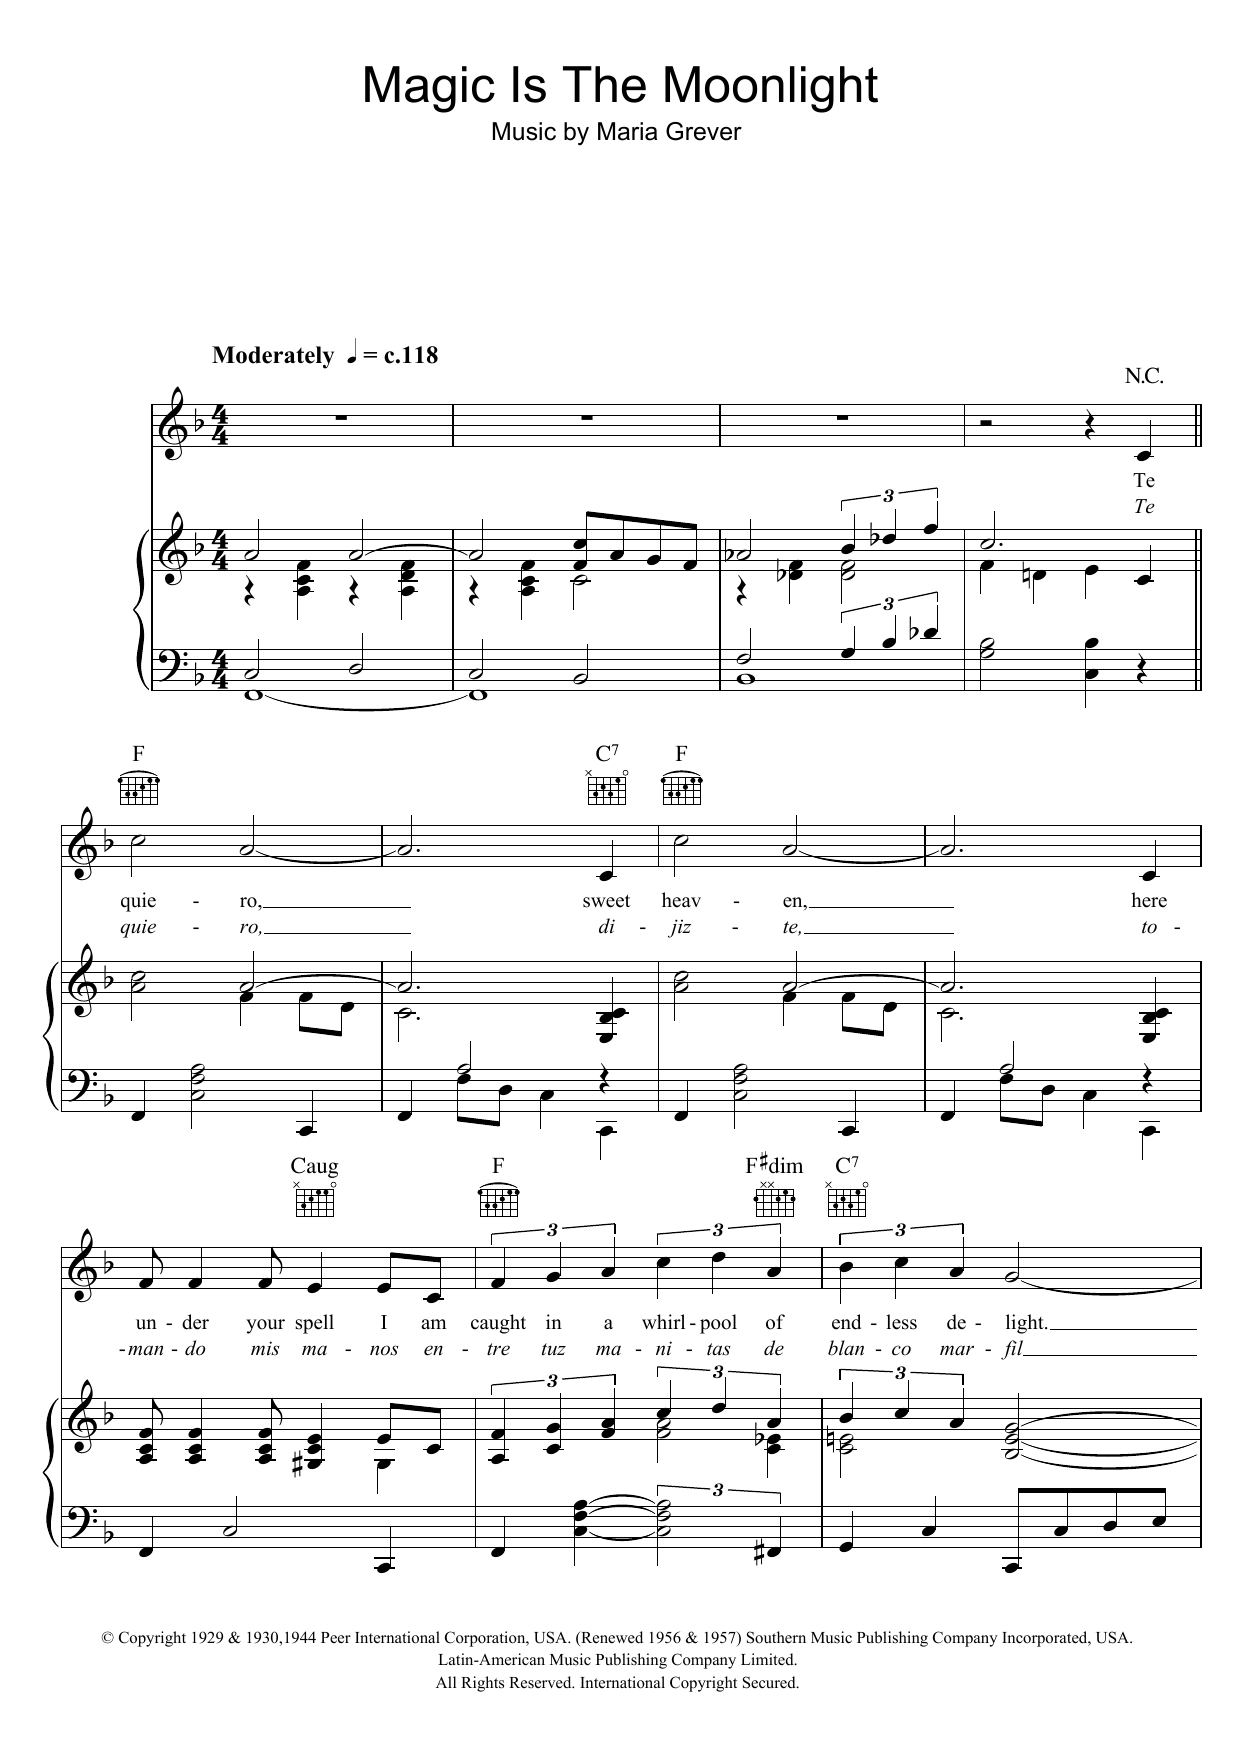 Cliff Richard Magic Is The Moonlight (Te Quiero Dijiste) sheet music notes and chords. Download Printable PDF.